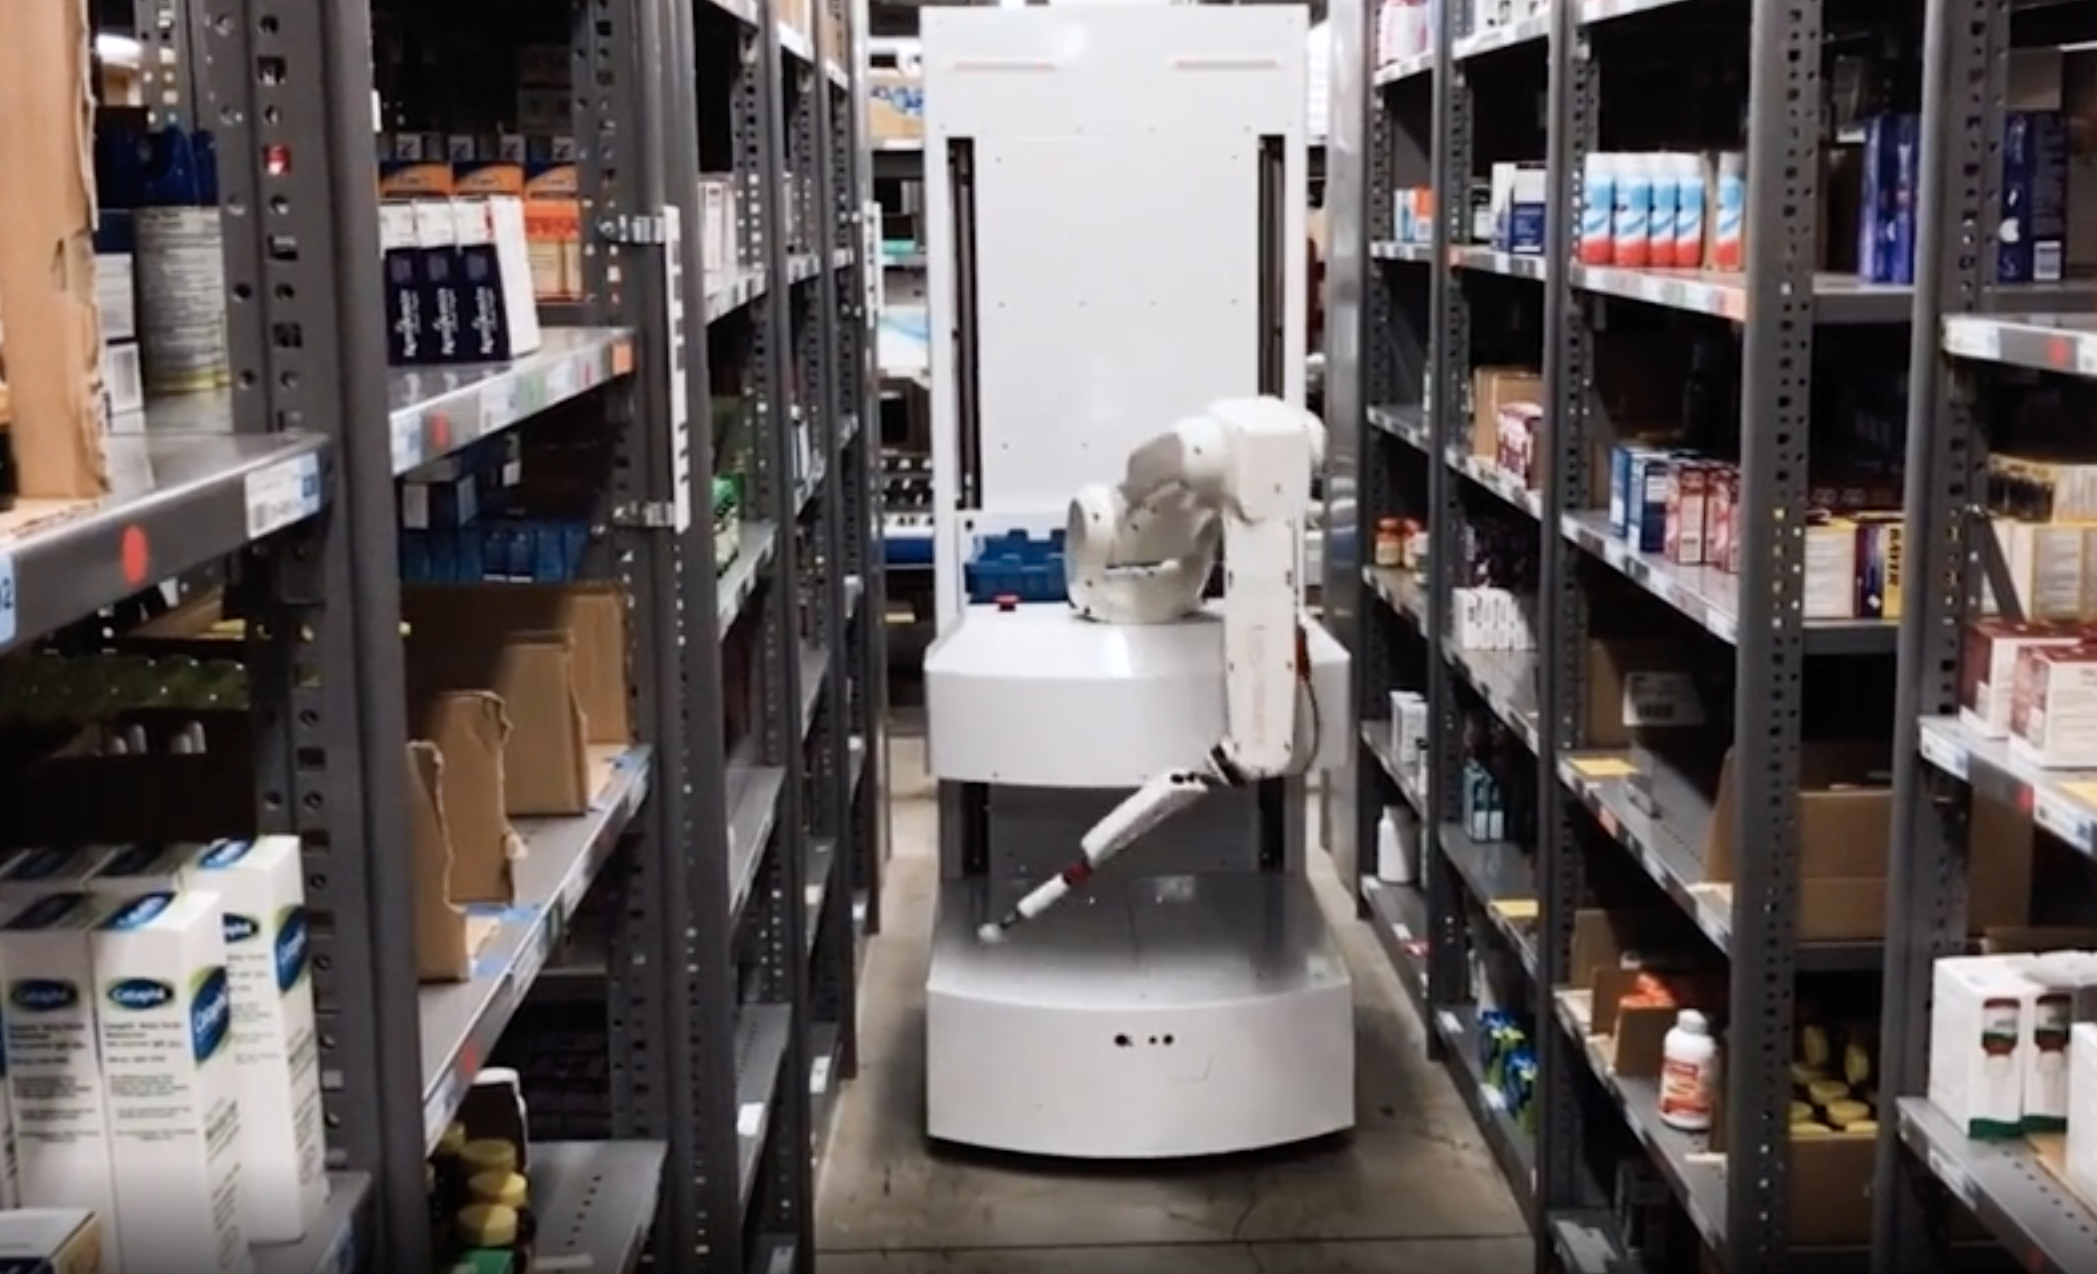 Robot that is part of an e-commerce automation solution.